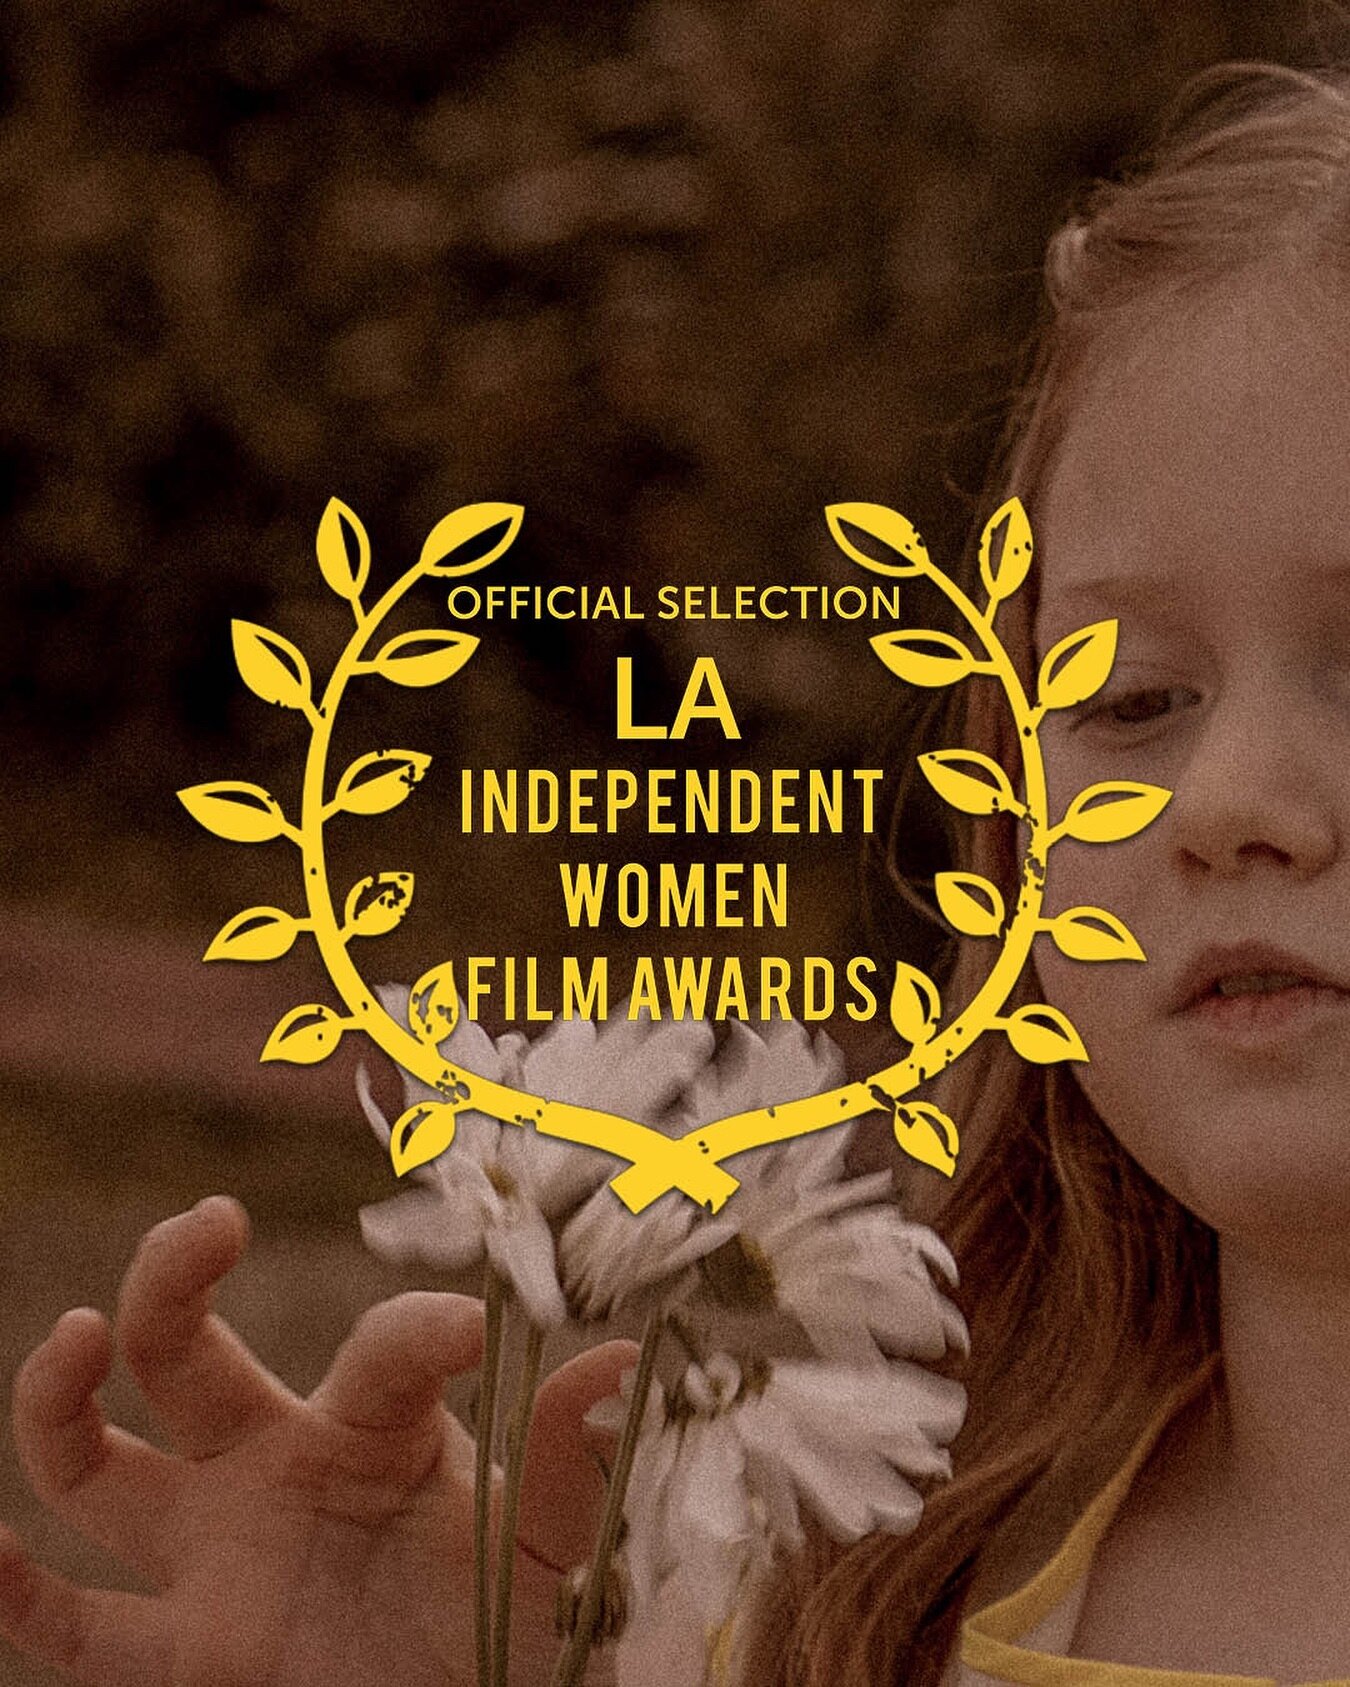 @daisiesfilm has done it again! we&rsquo;re happy to announce that Daisies is an official selection of the @laindependentwomenfilmawards. 

The LA Independent Women Film Awards showcases the best female talent in film and television around the world,